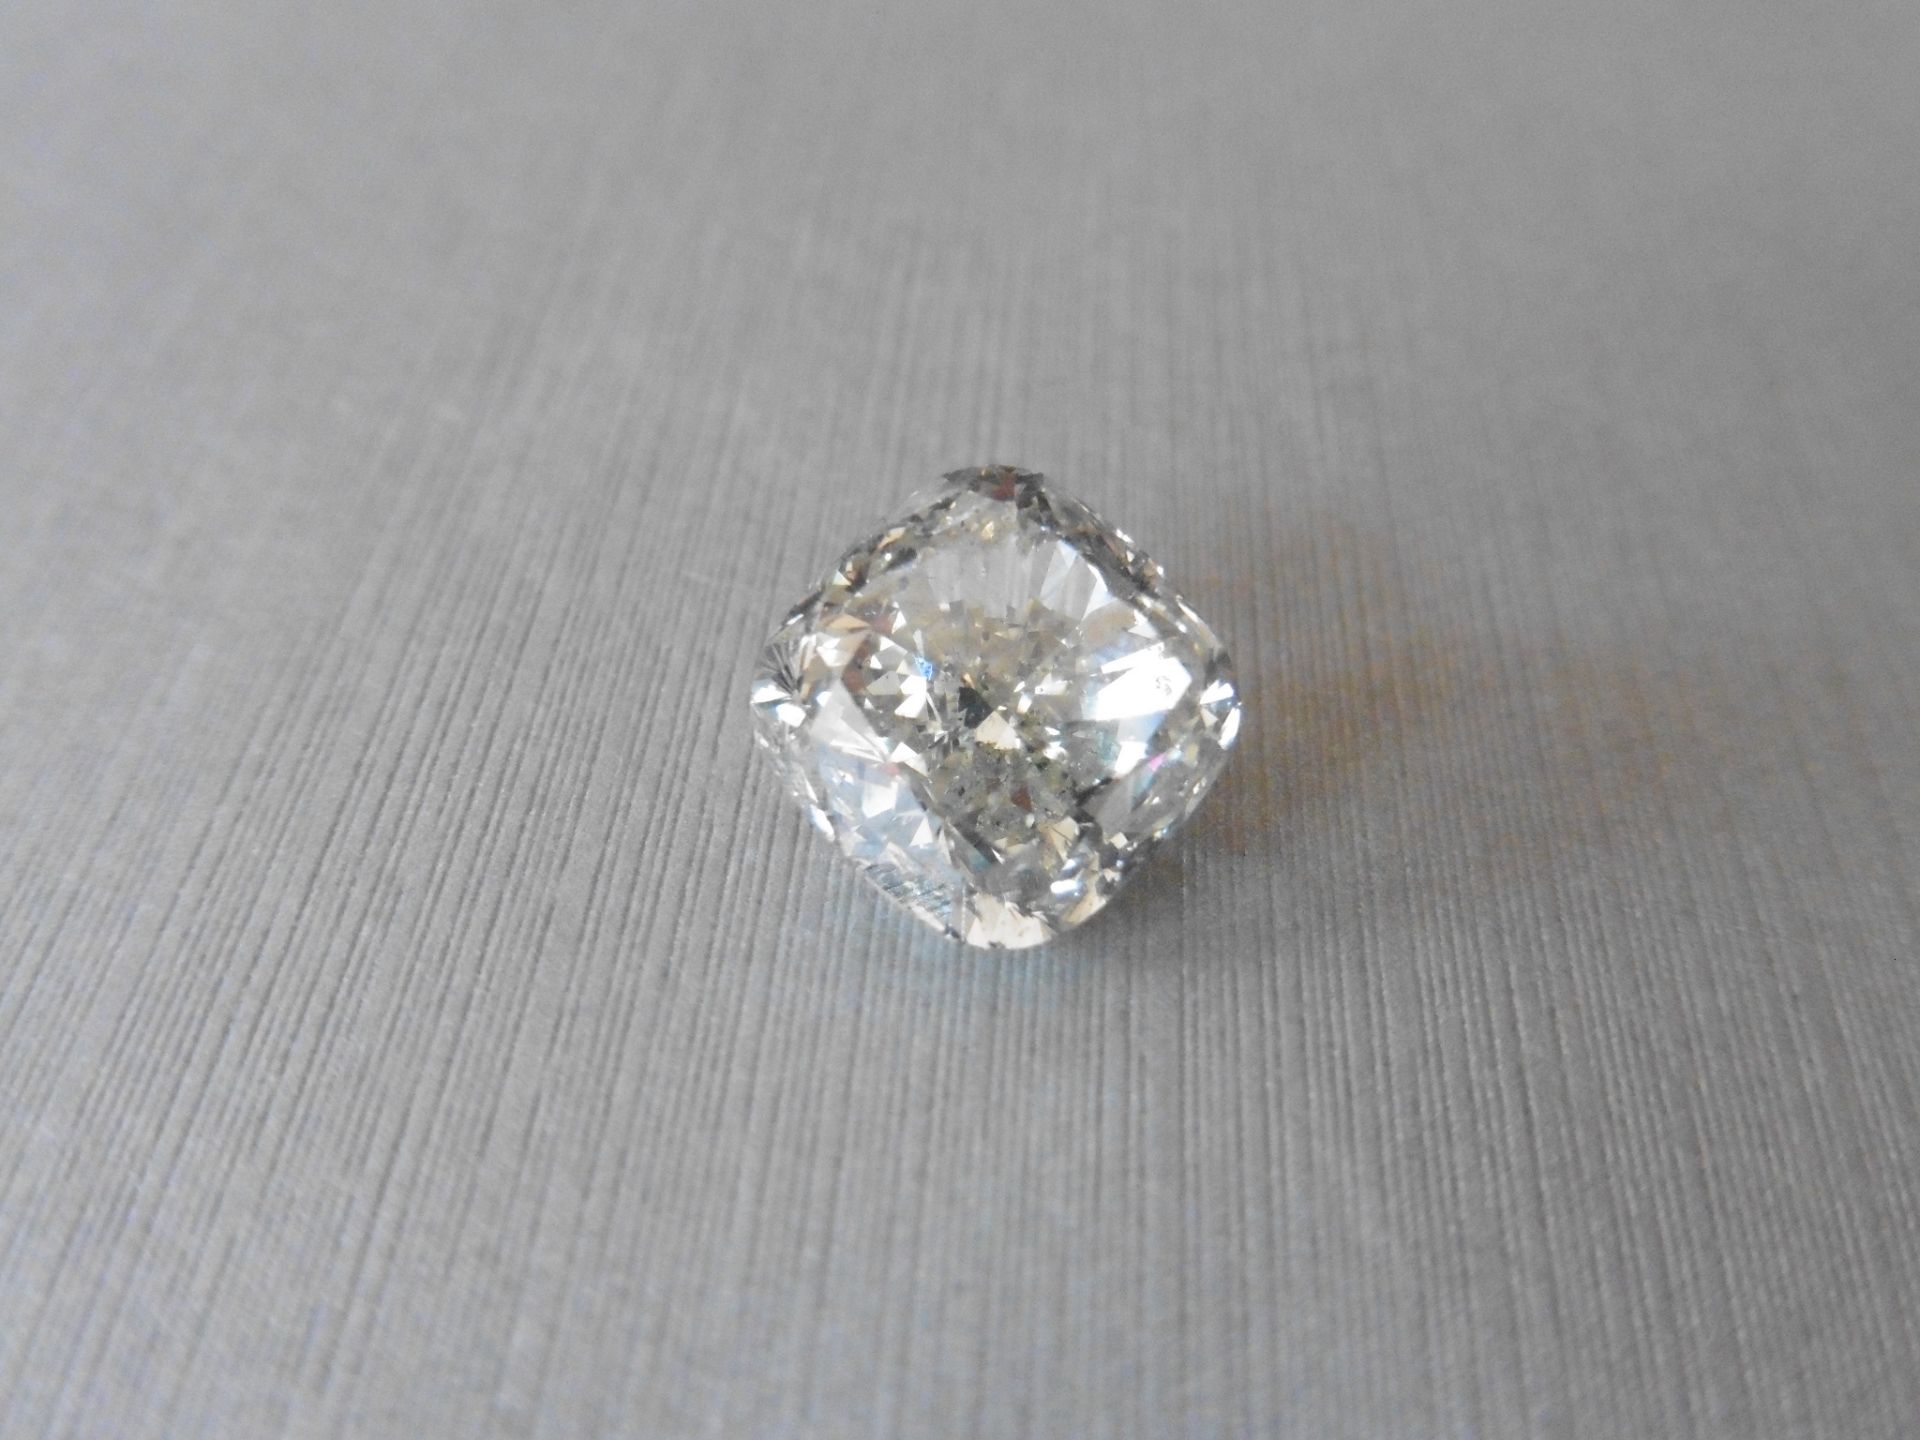 10.10ct single old cut cushion diamond , K colour SI2 clarity. Suitable for mounting in a ring or